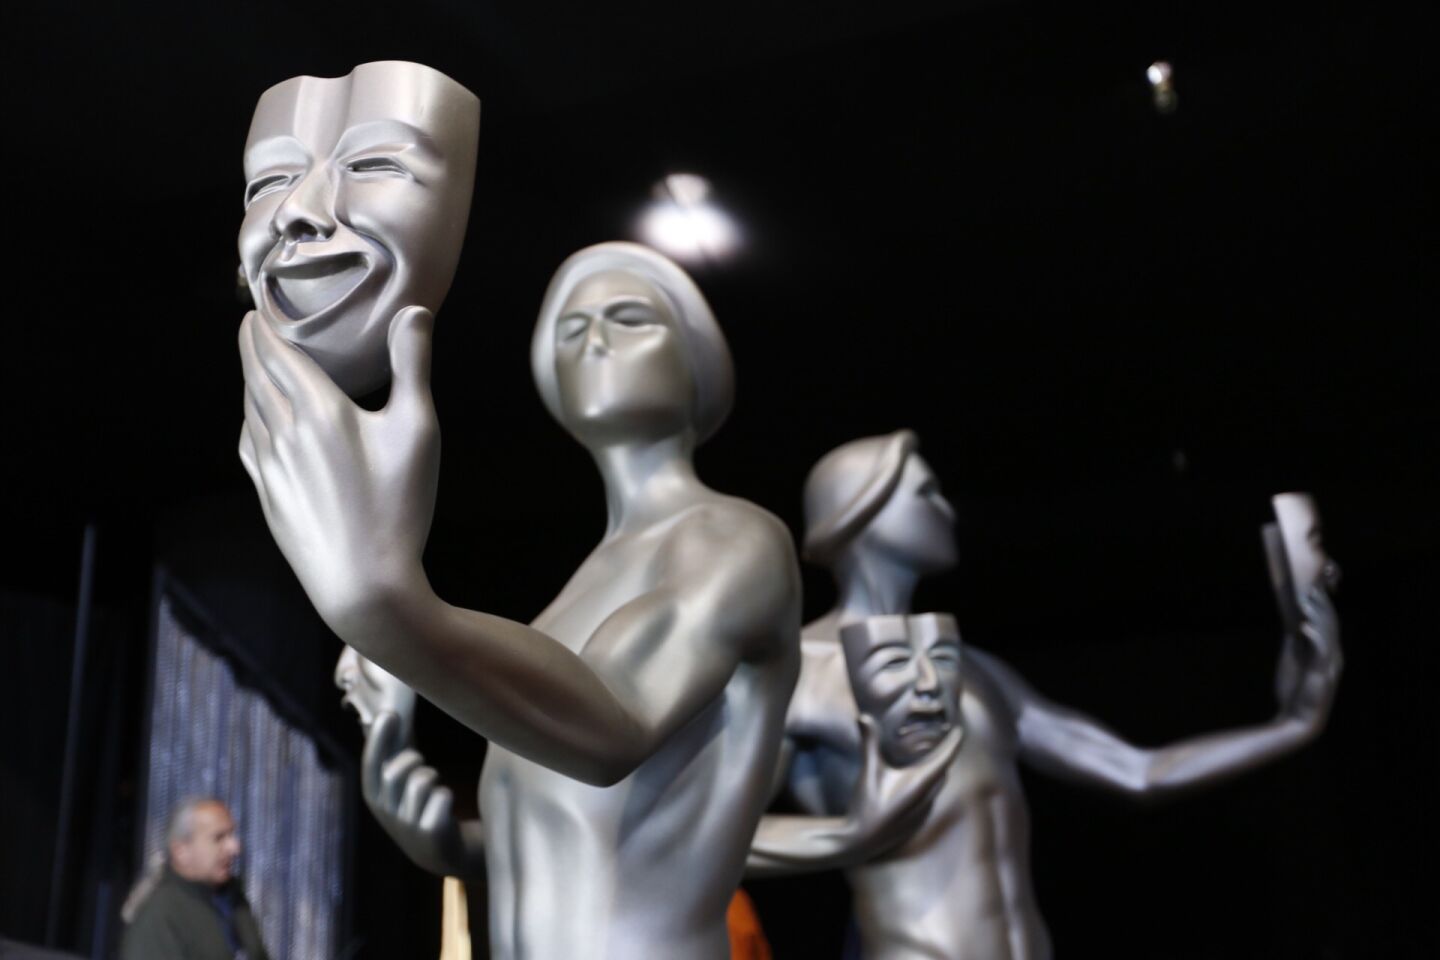 Staging the Screen Actors Guild Awards